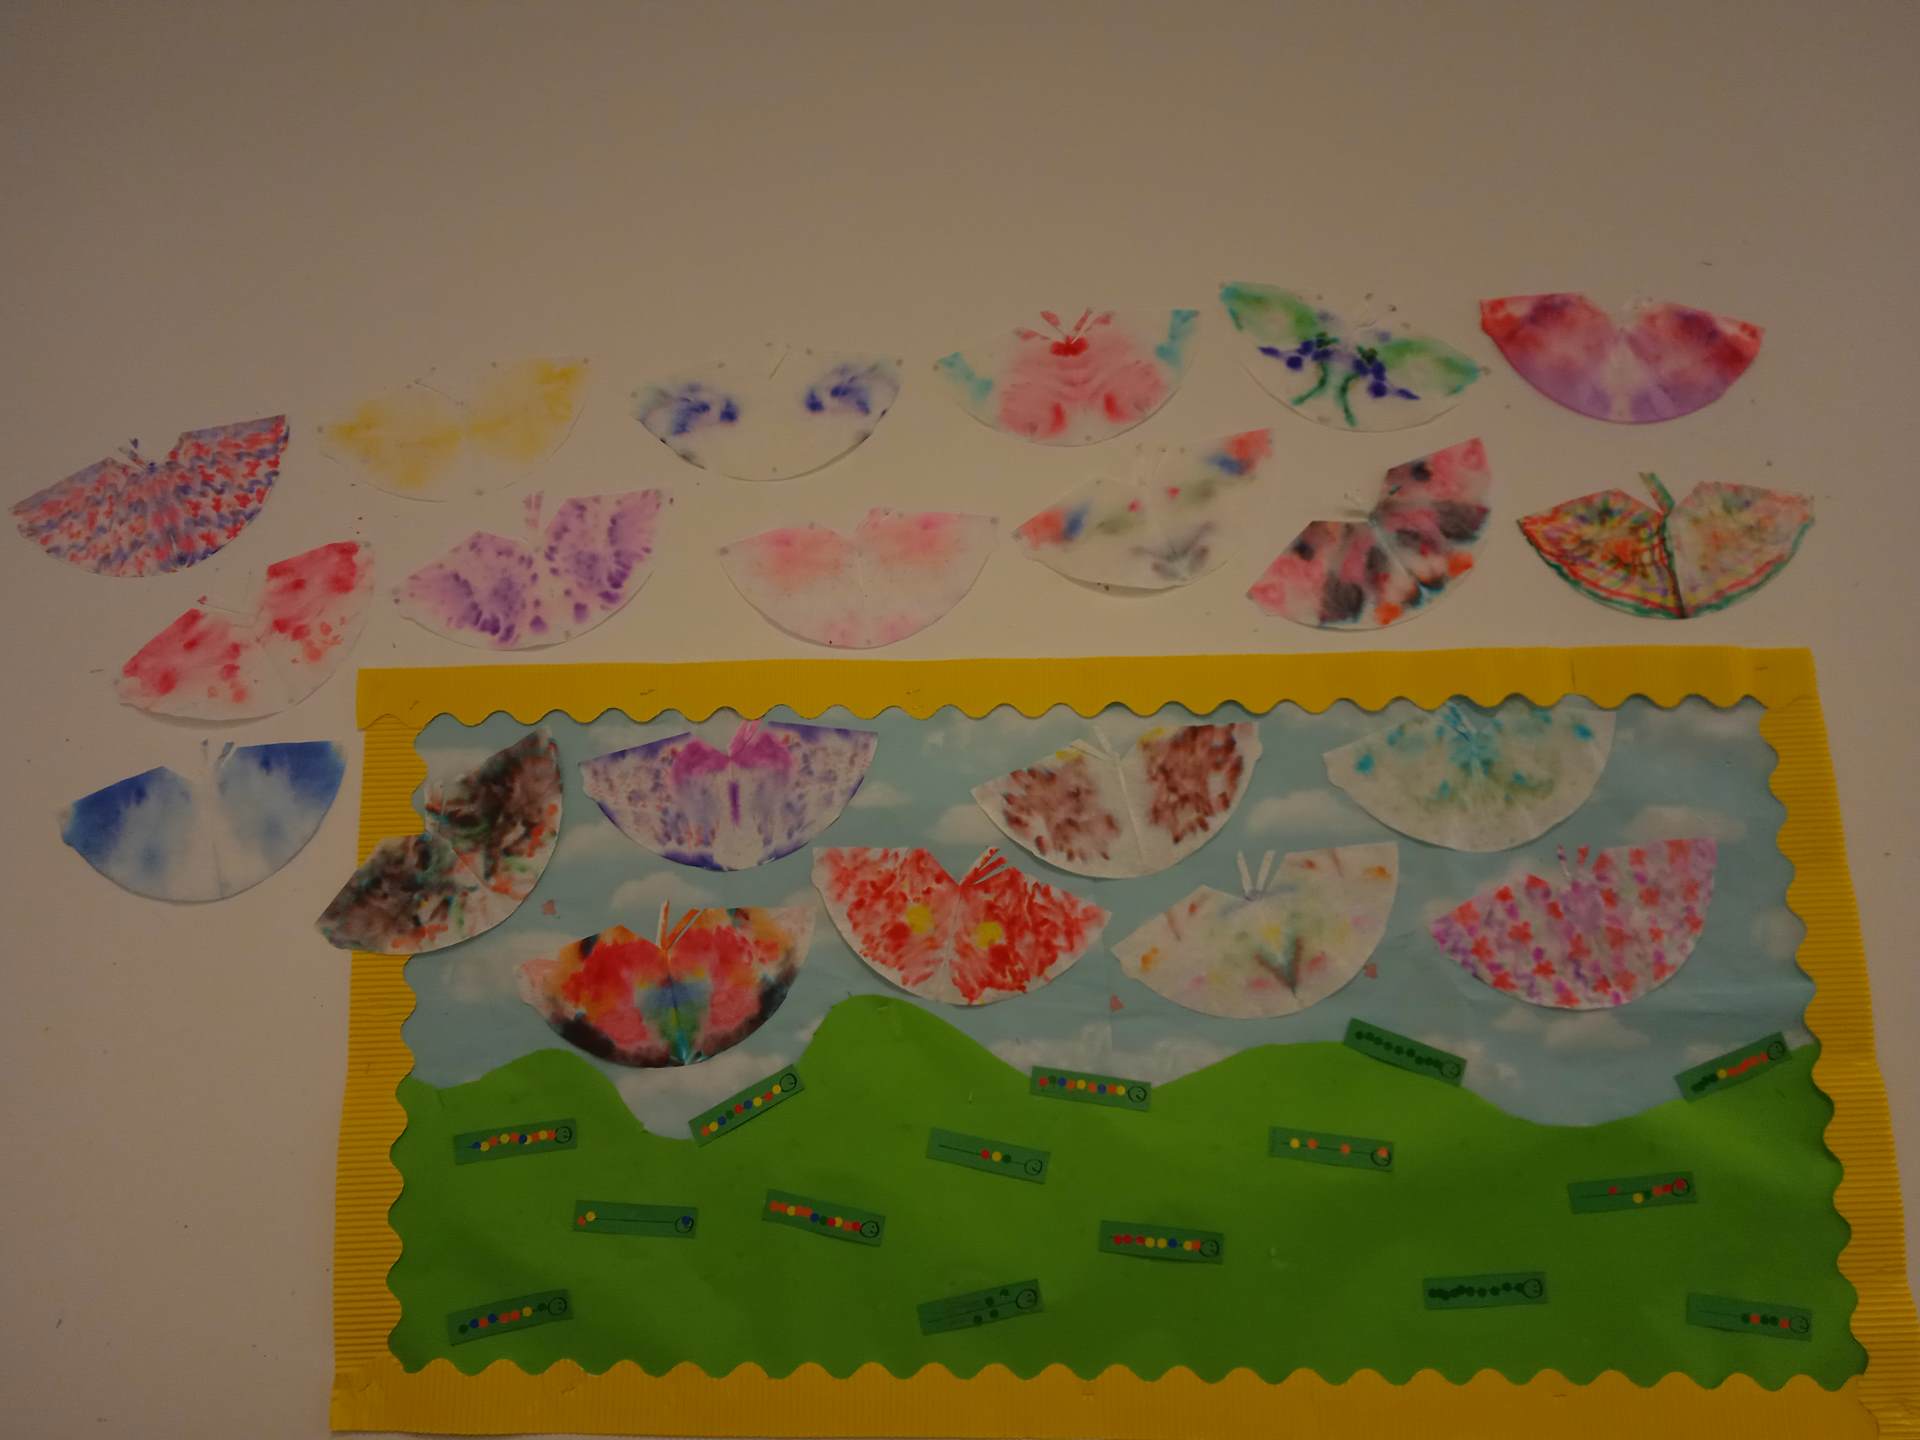 Display with sticker caterpillars and butterflies